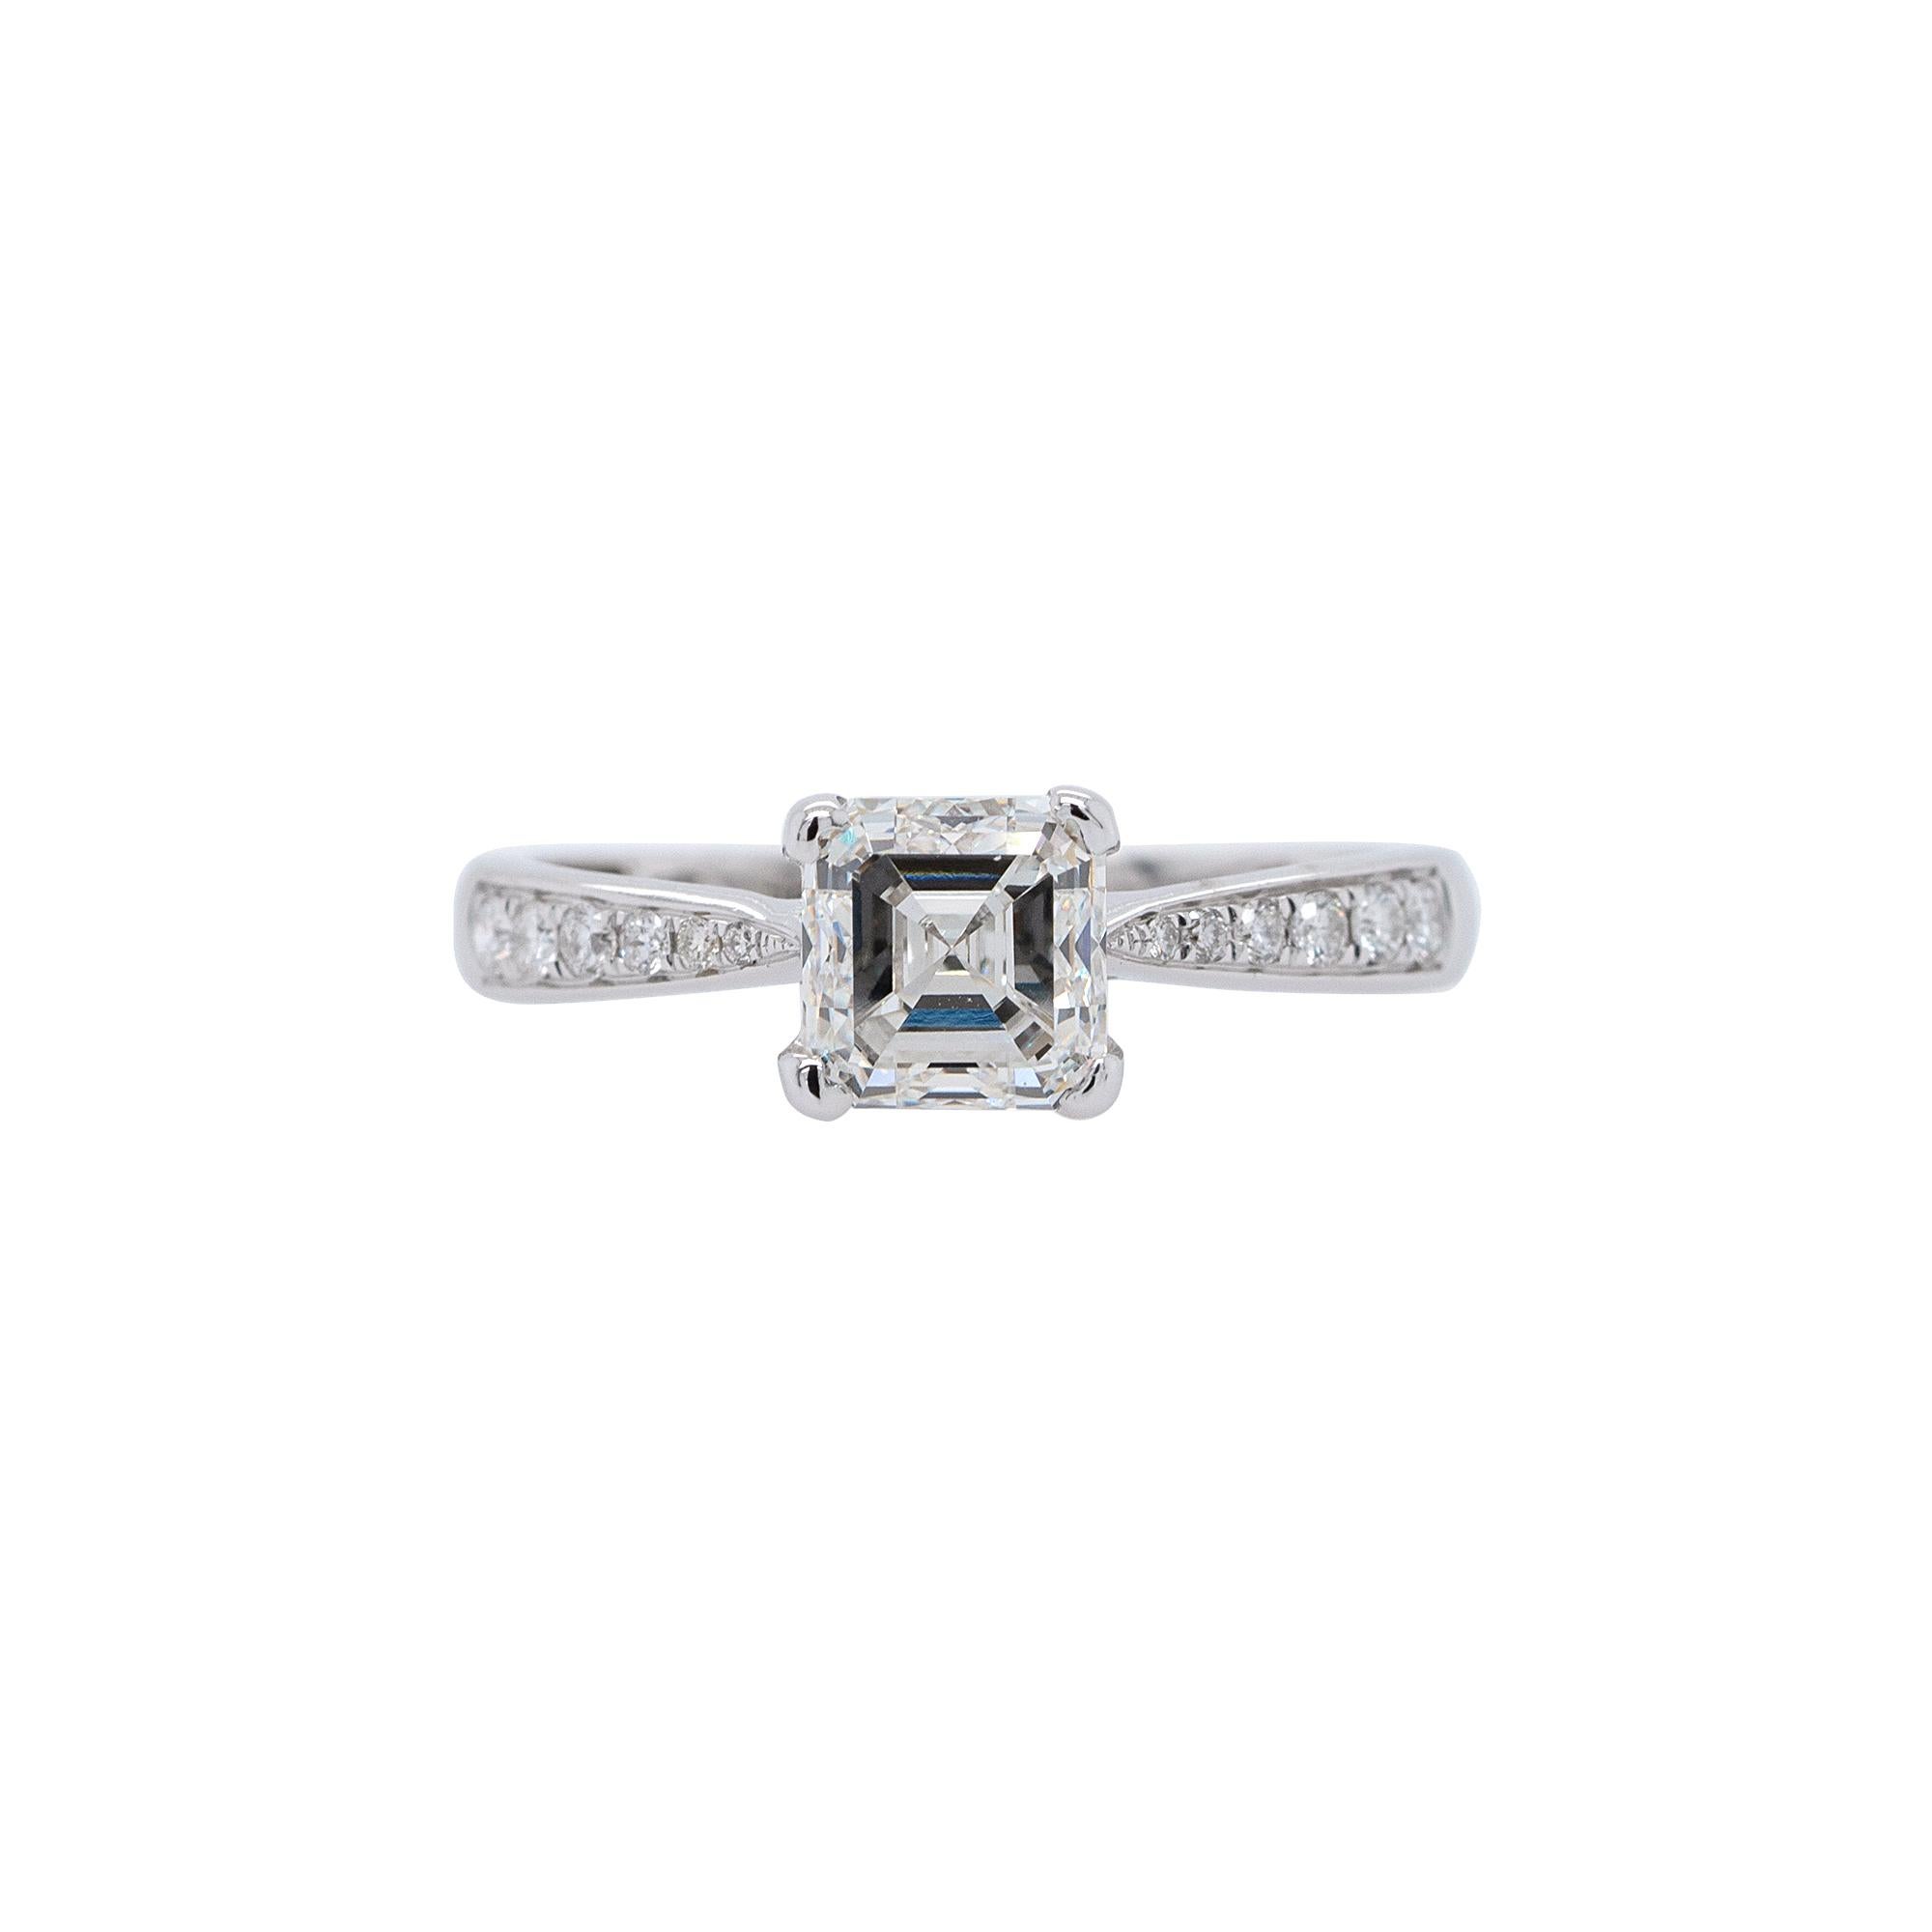 Embrace everlasting love with this exquisite 18k White Gold Engagement Ring featuring a mesmerizing GIA 1.48ct Emerald Cut Natural Diamond at its center. Adorned with 0.50ctw of dazzling round cut diamonds, this sophisticated masterpiece exudes